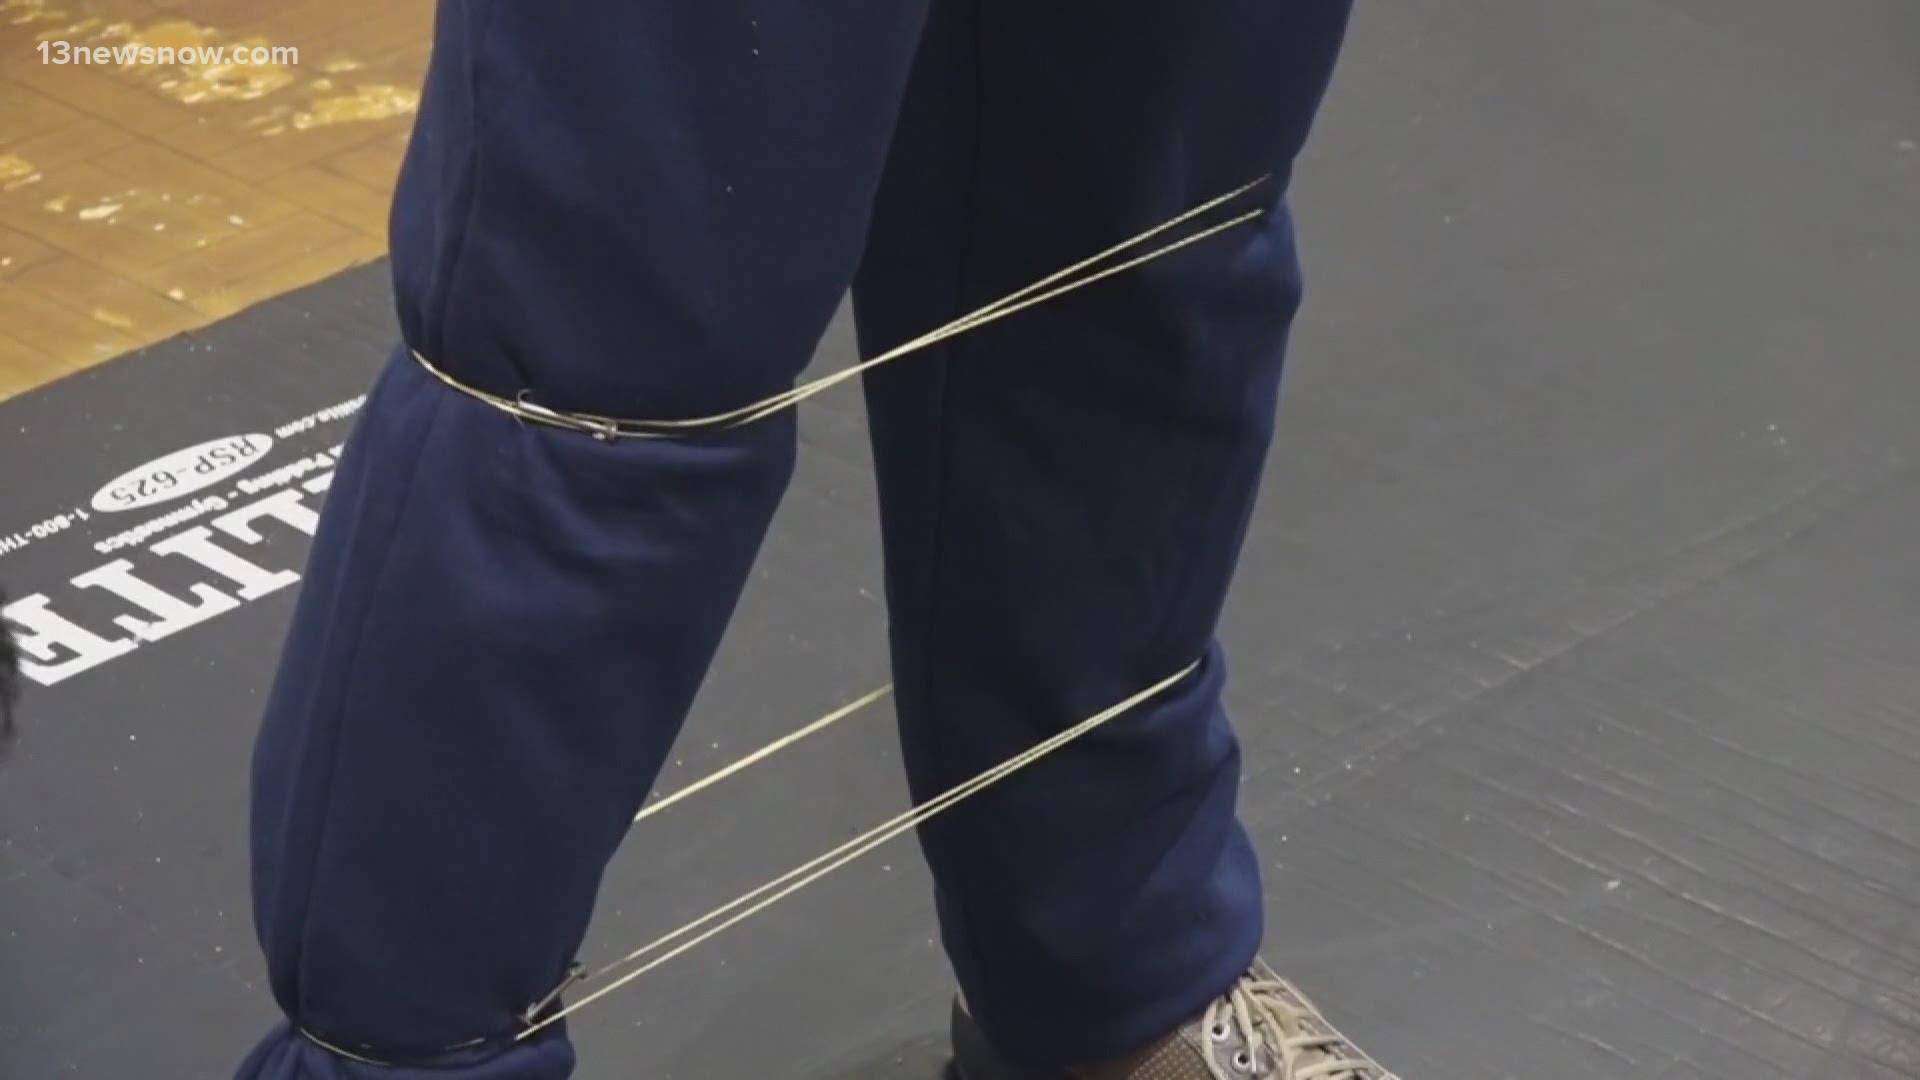 The new technology uses a remote device to discharge rope that wraps around a potential suspect.